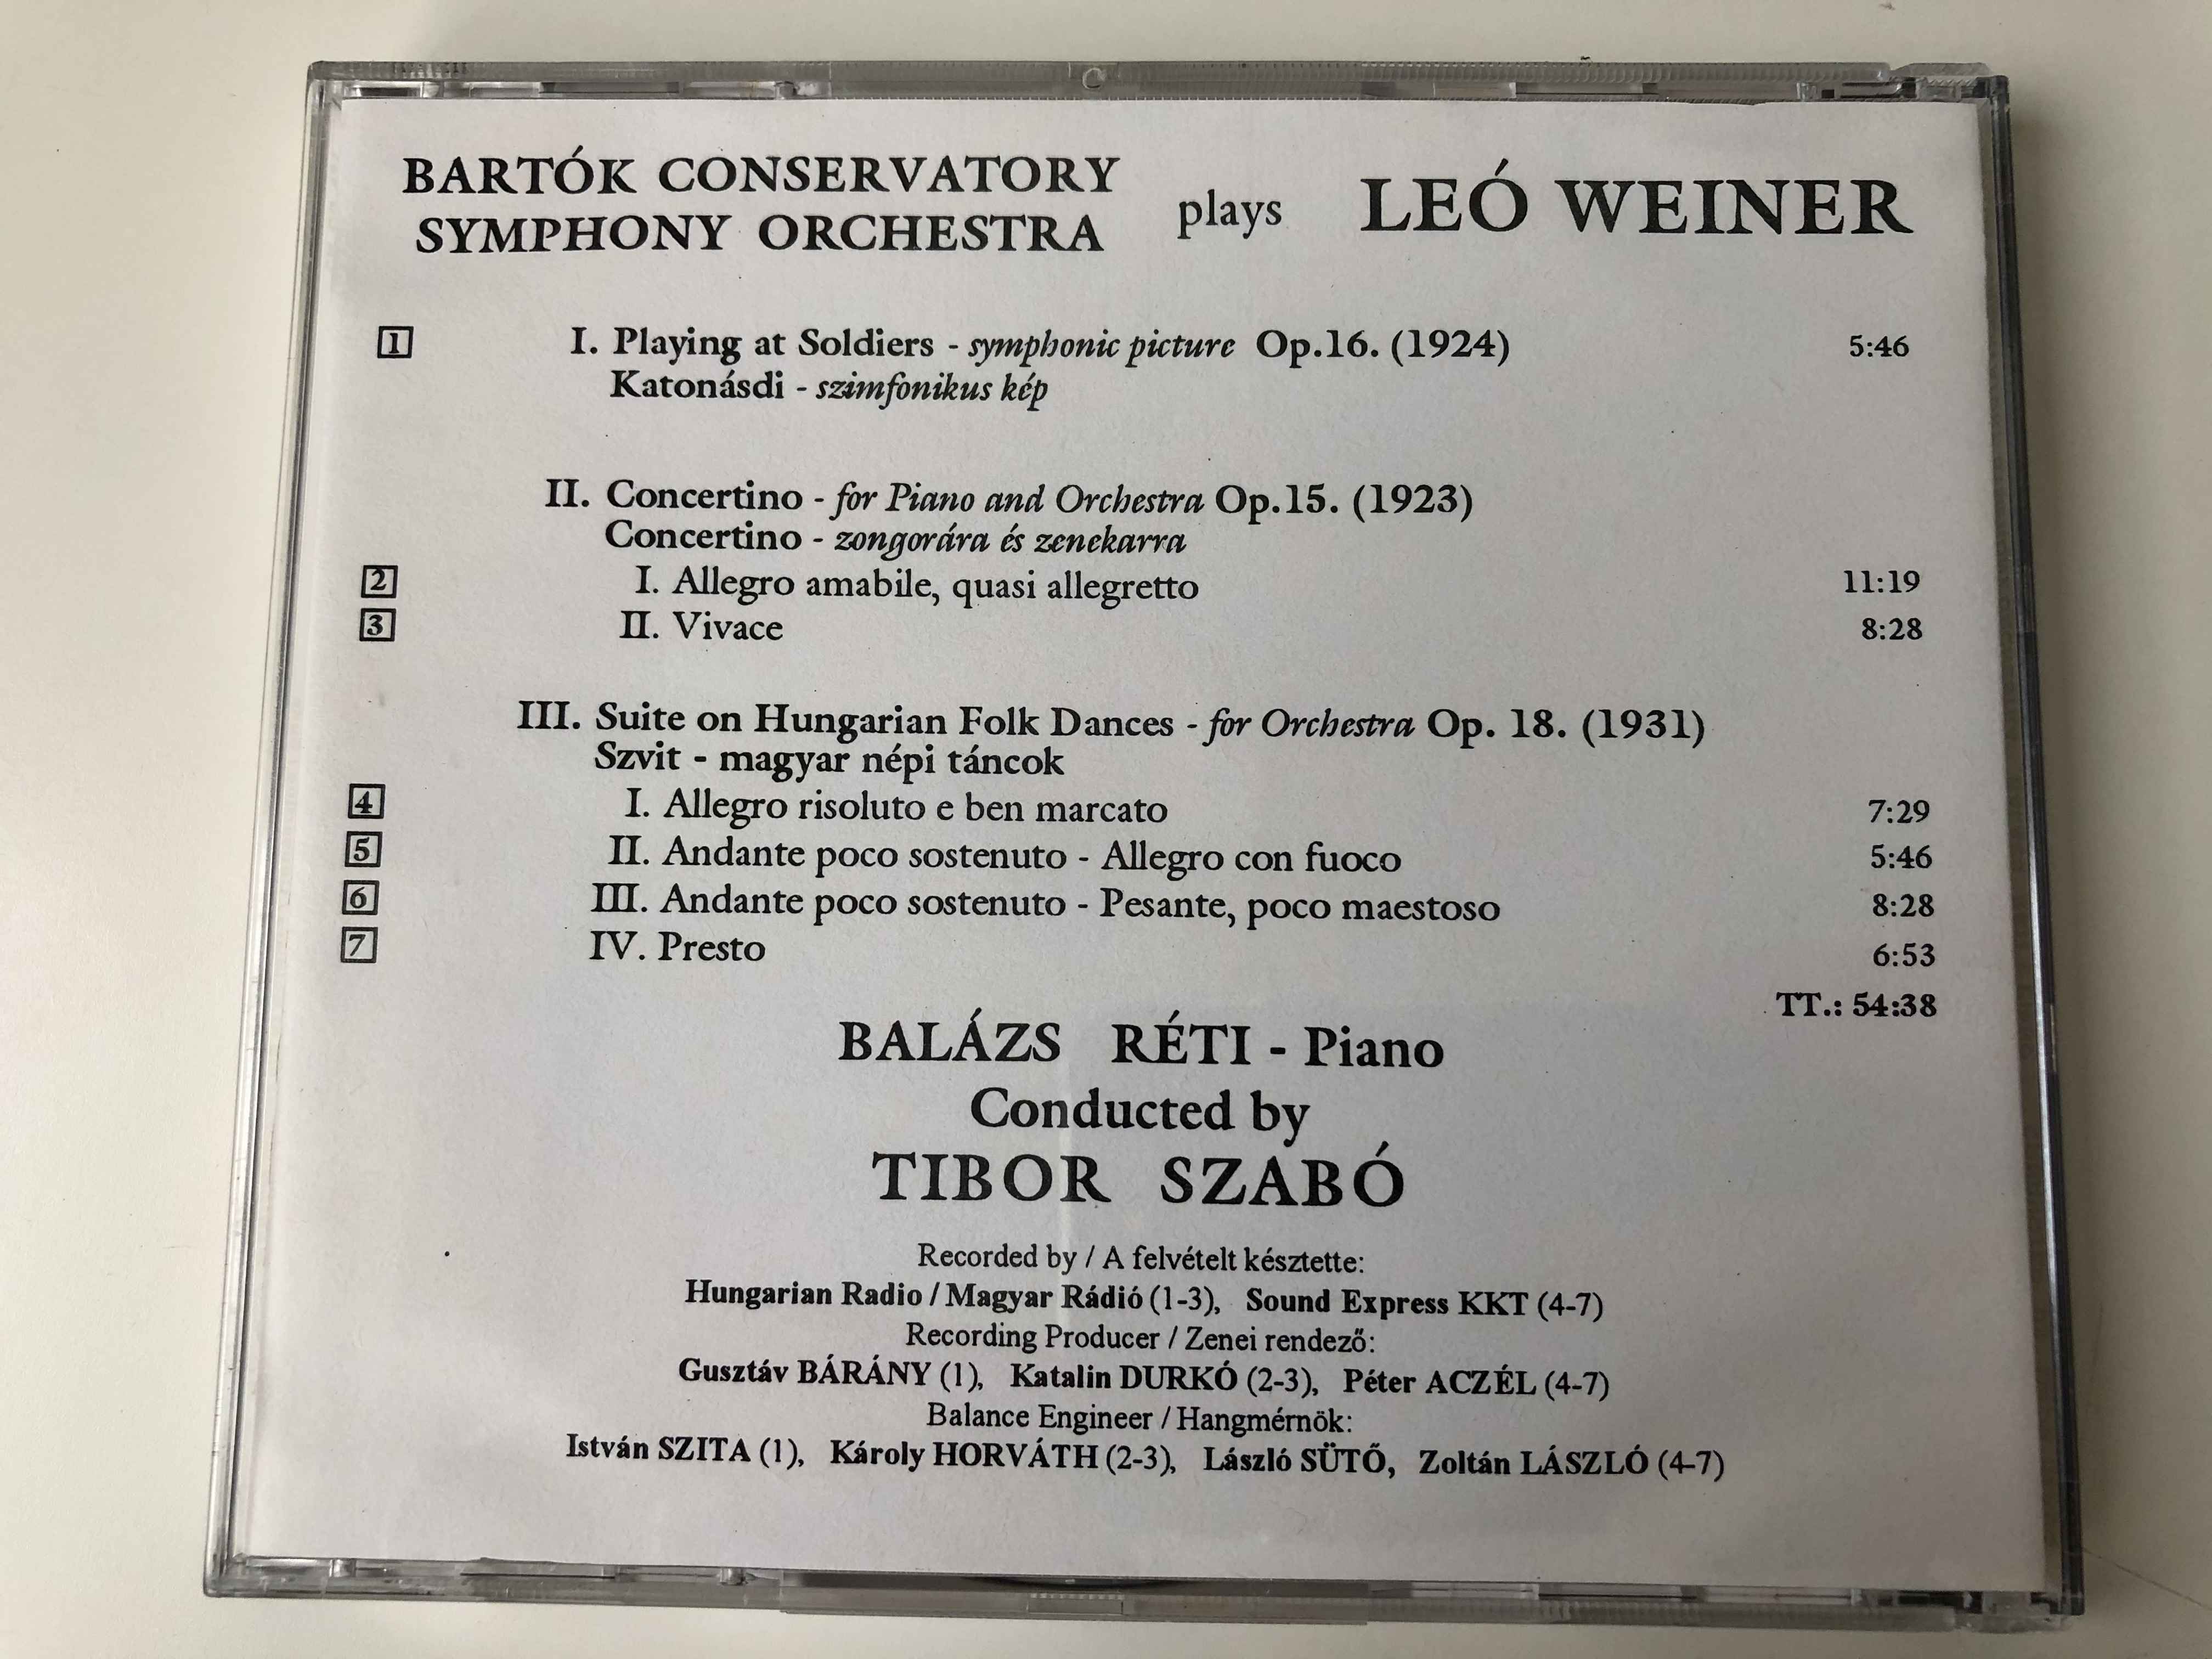 leo-weiner-playing-at-soldiers-symphonic-picture-concertino-for-piano-and-orchestra-suite-on-hungarian-folk-dances-for-orchestra-bartok-conservatory-symphony-orchestra-budapest-soloist-ba-11-.jpg